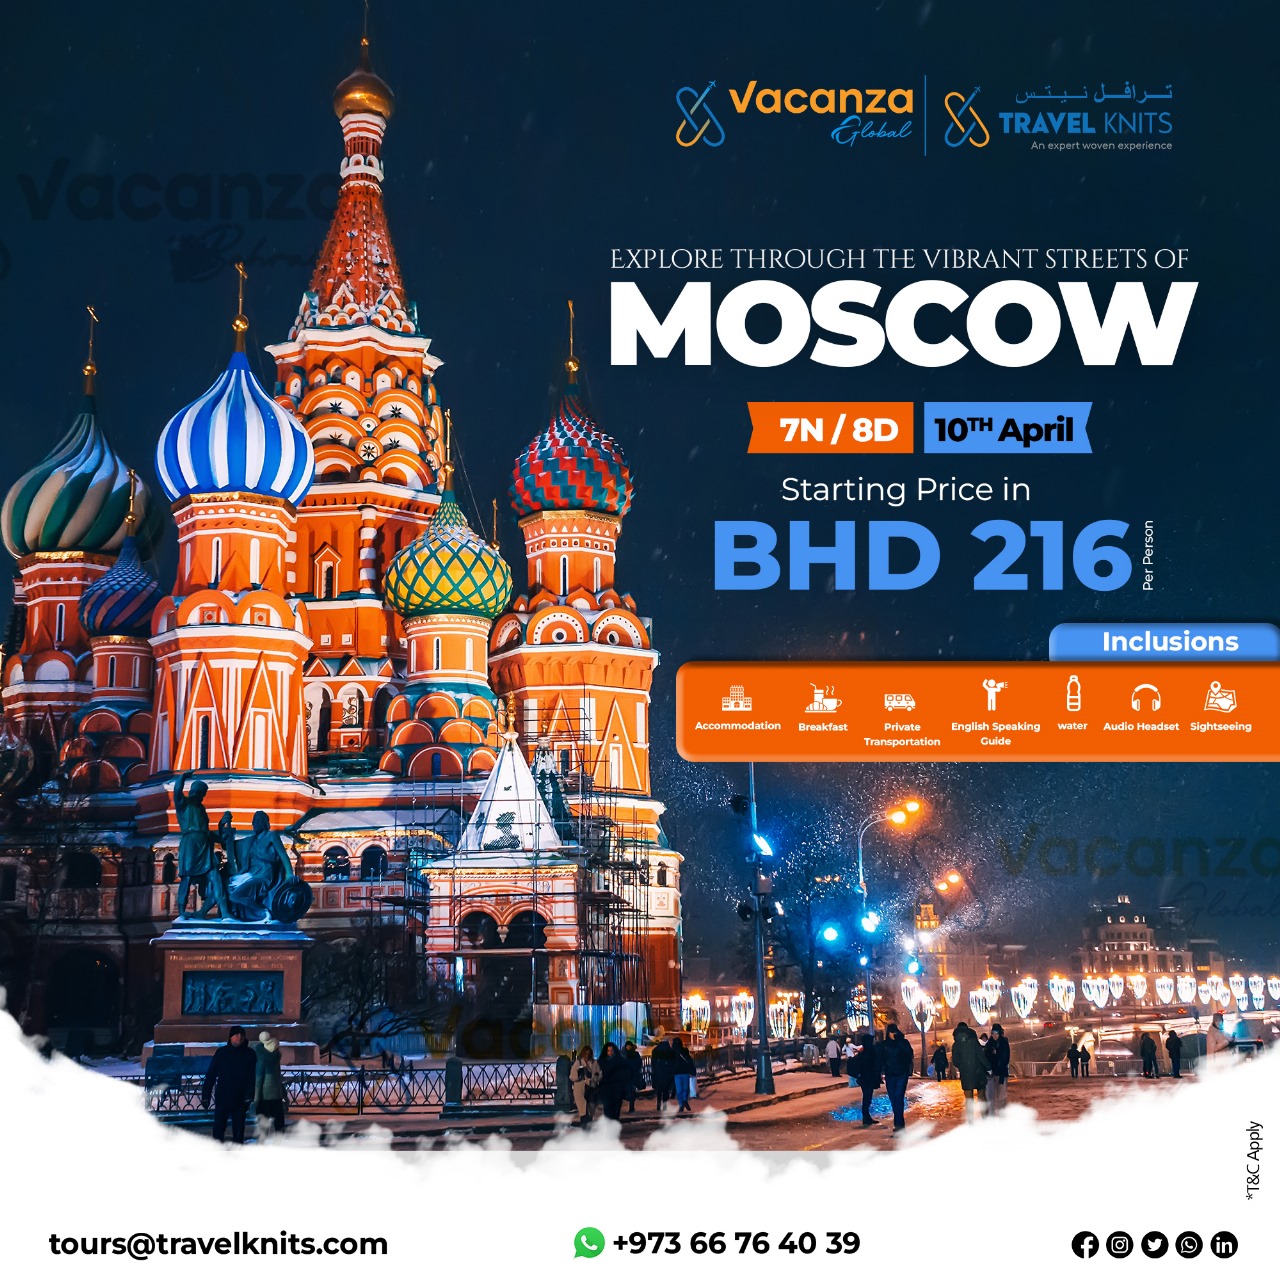 Eid holiday in moscowTour Packages - Book honeymoon ,family,adventure tour packages to Eid holiday in moscow|Travel Knits